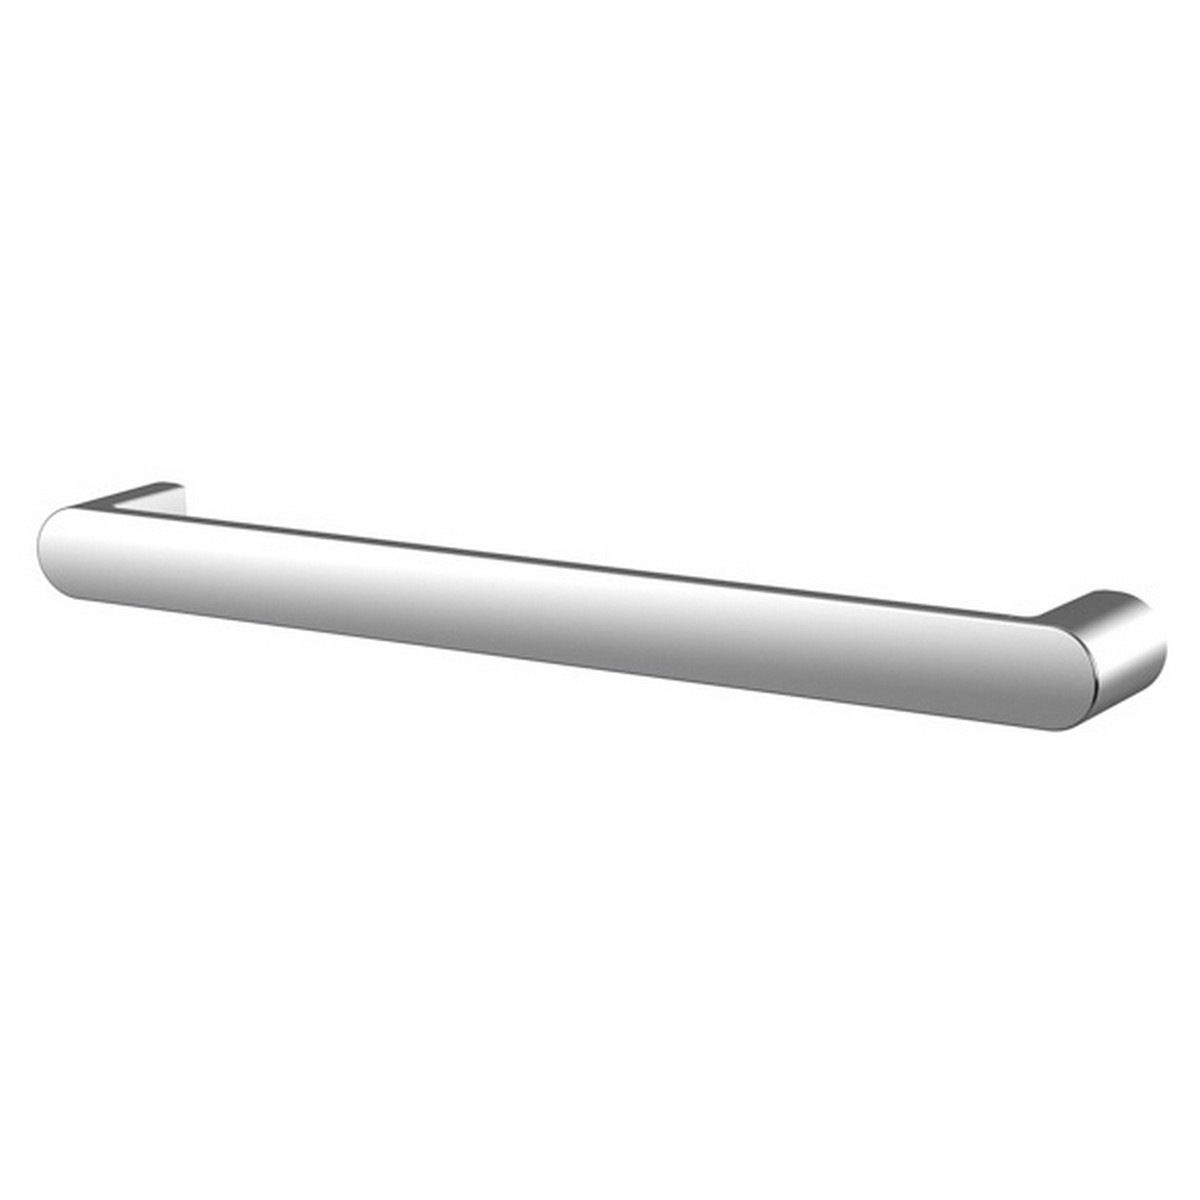 KEUCO 31601010400 ELEGANCE 16 7/8 INCH WALL MOUNTED SUPPORT RAIL IN POLISHED CHROME